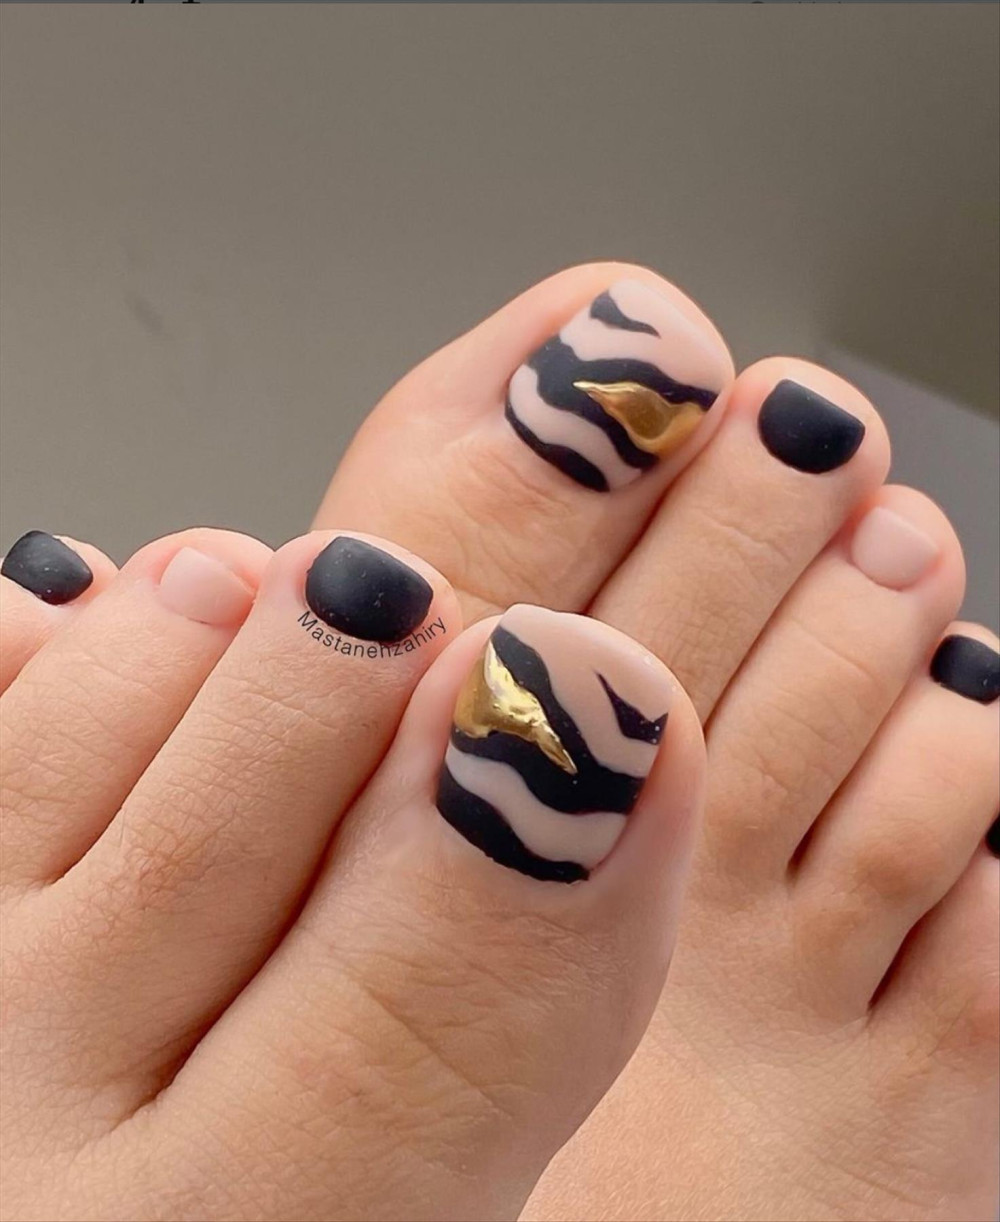 30 Cute Toe Nail Designs To Make Your Feet Adorable - T-News